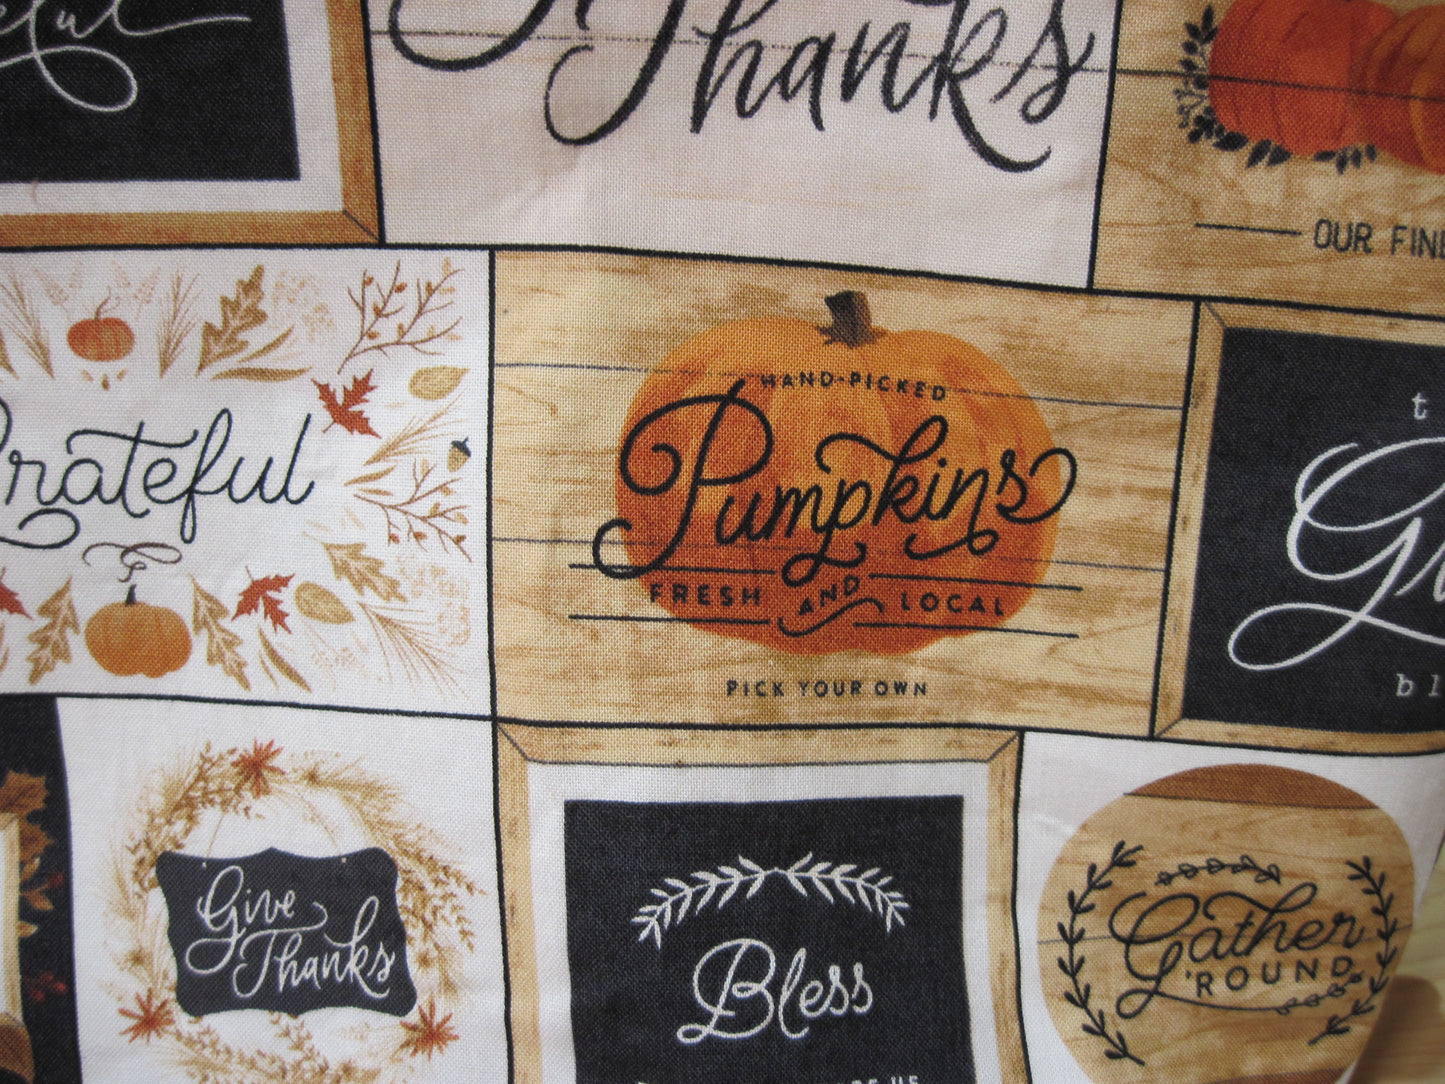 Medium Thankful Sayings "Grateful" Blessed" Give Thanks" w/ pumpkins & snaps project bag